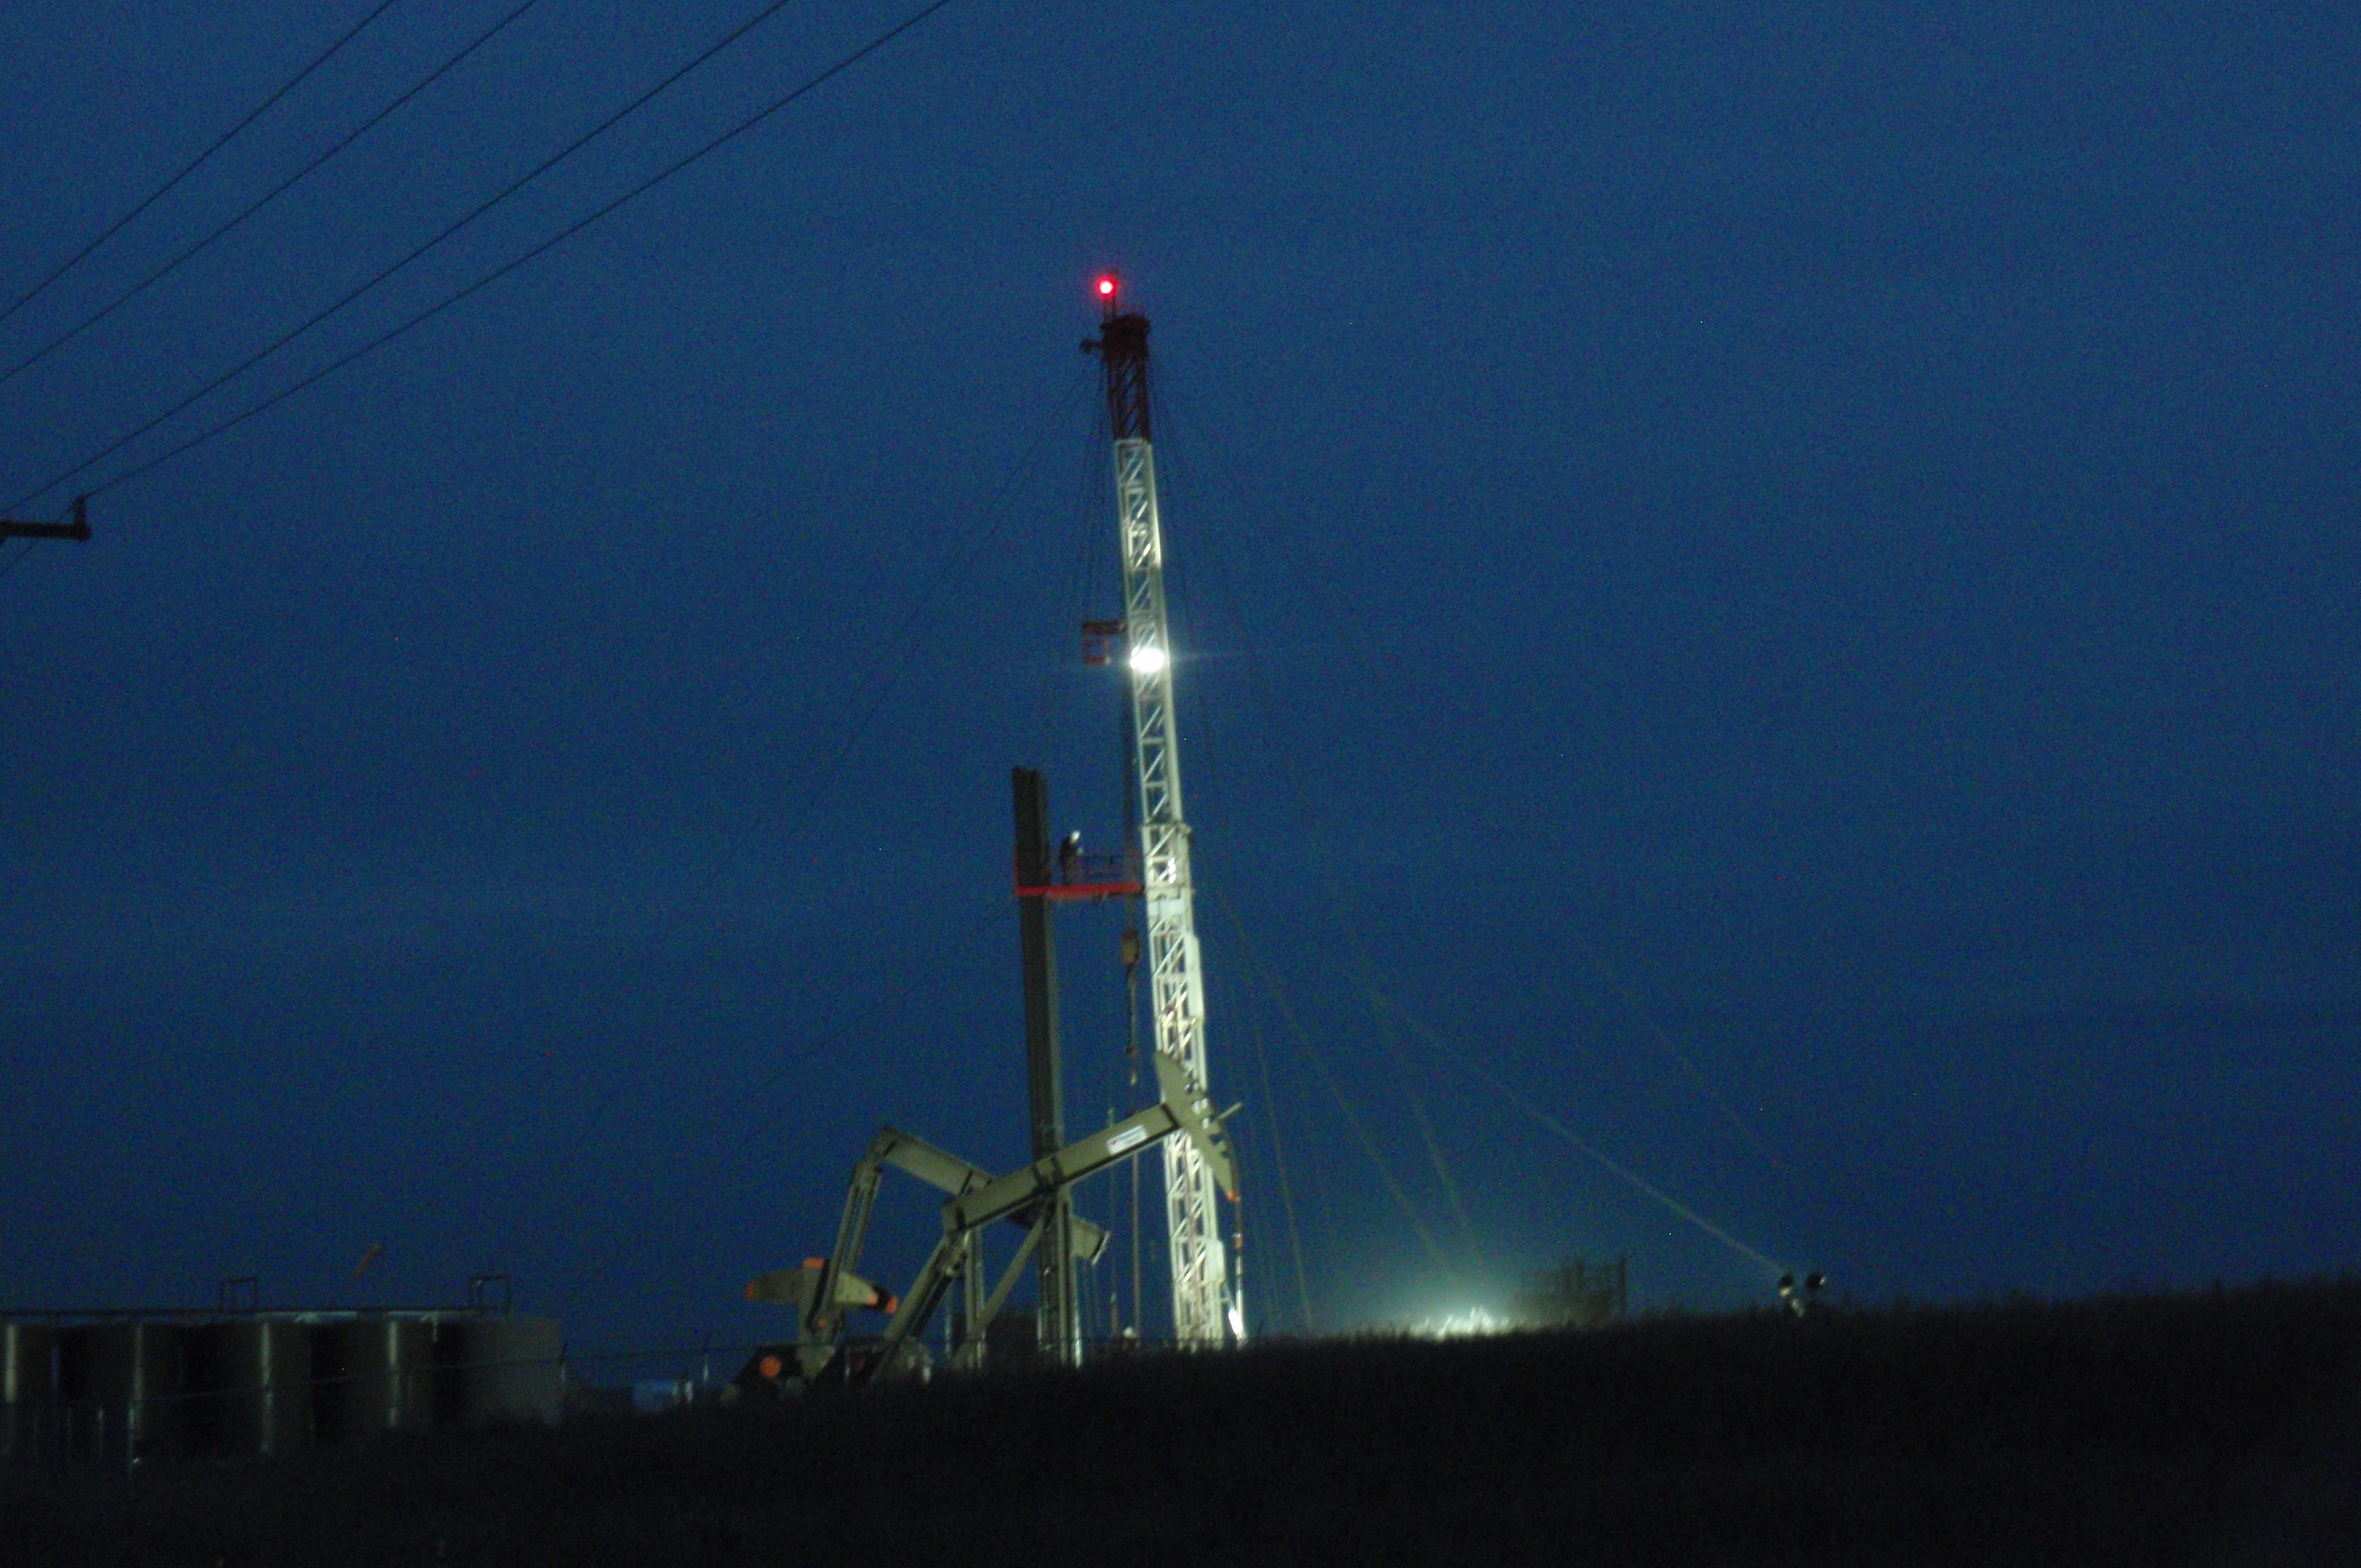 Workover rig, immediately north of Williston. Photo by James Ulvog.